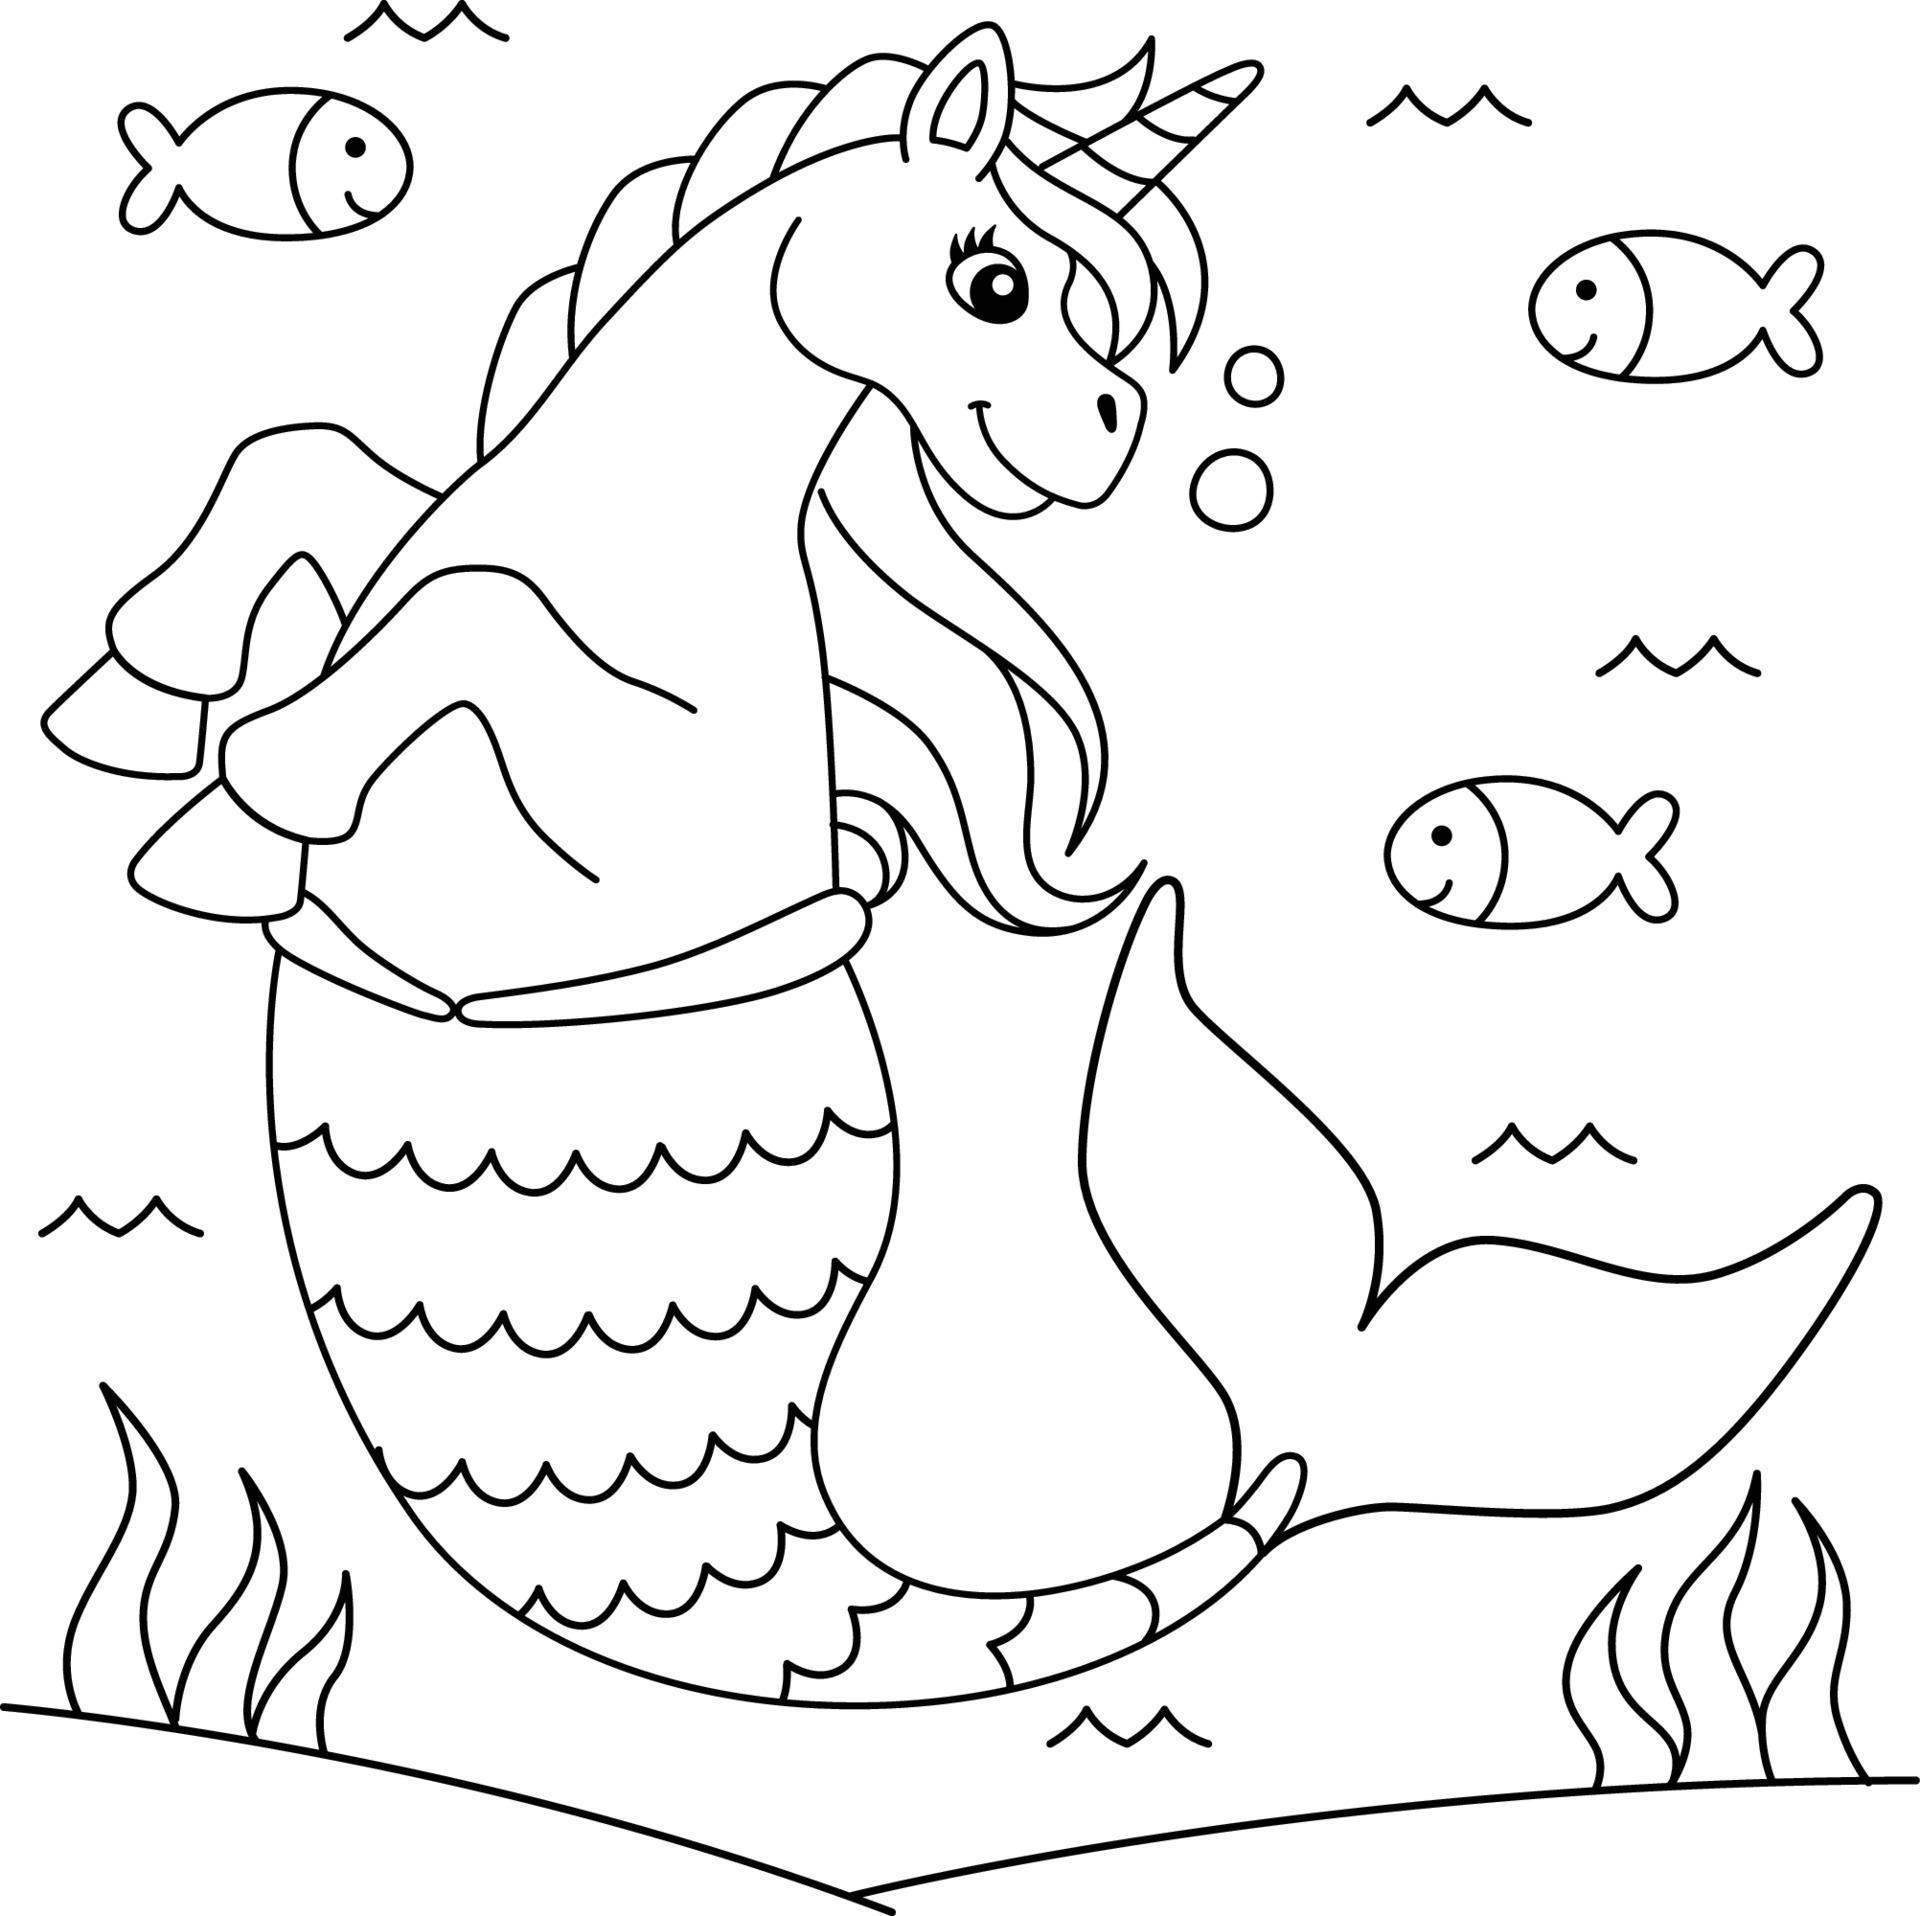 Unicorn Mermaid Coloring Page for Kids 20 Vector Art at Vecteezy